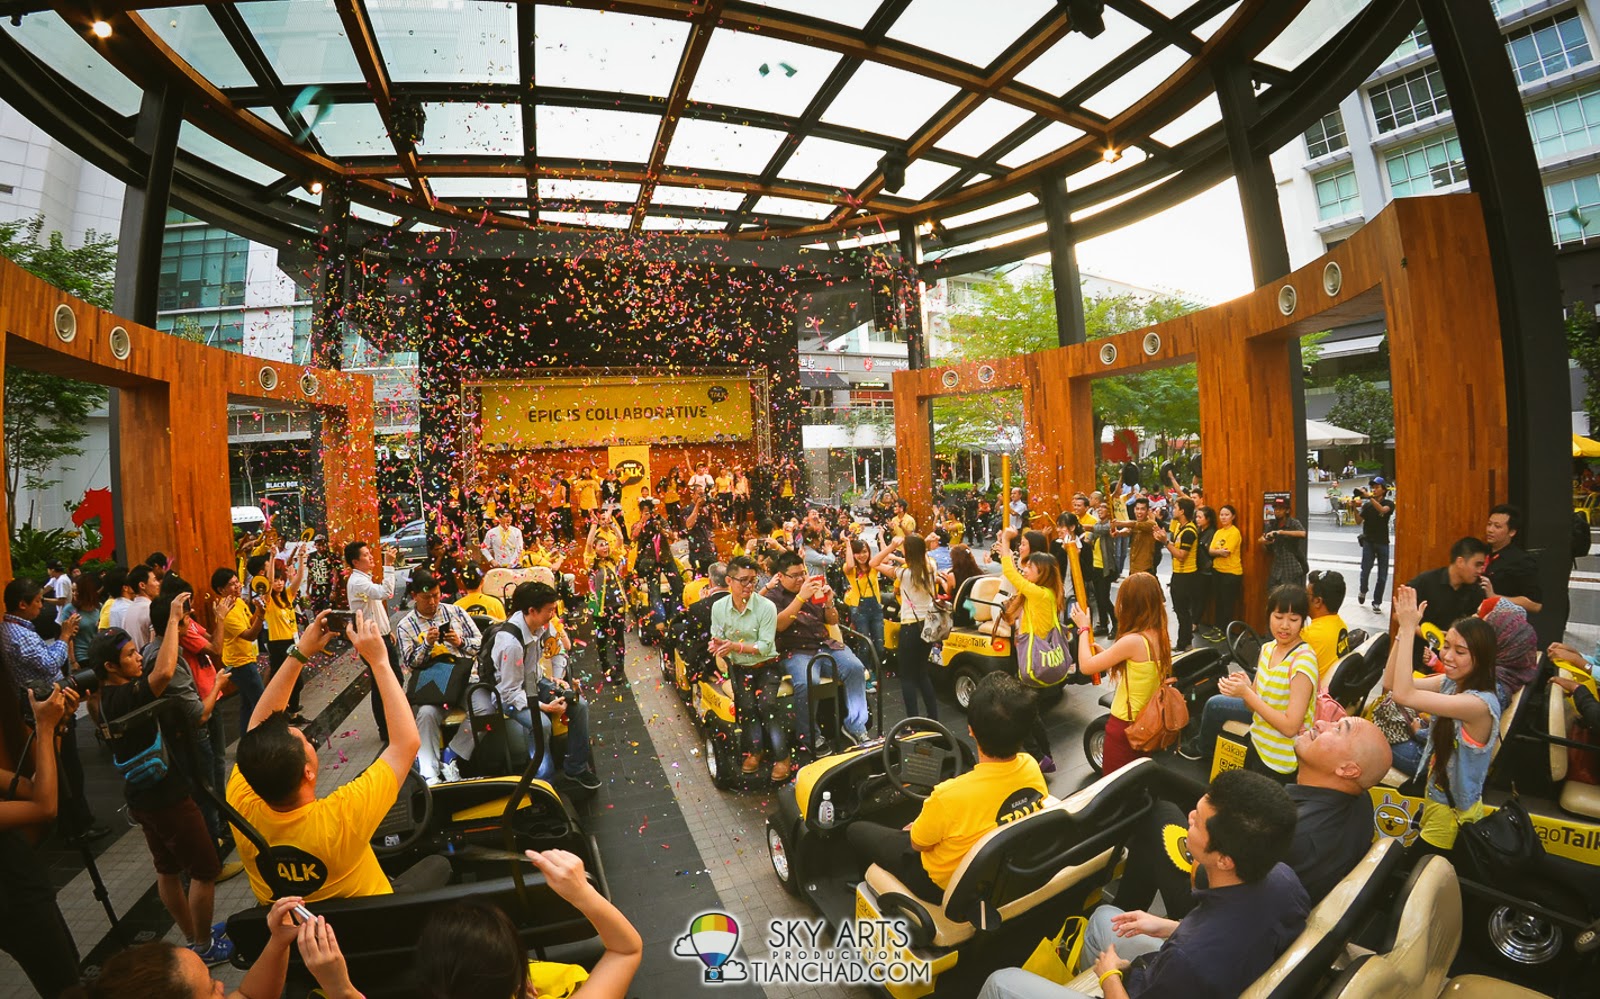 Showered by confetti at the last epic KakaoTalk station